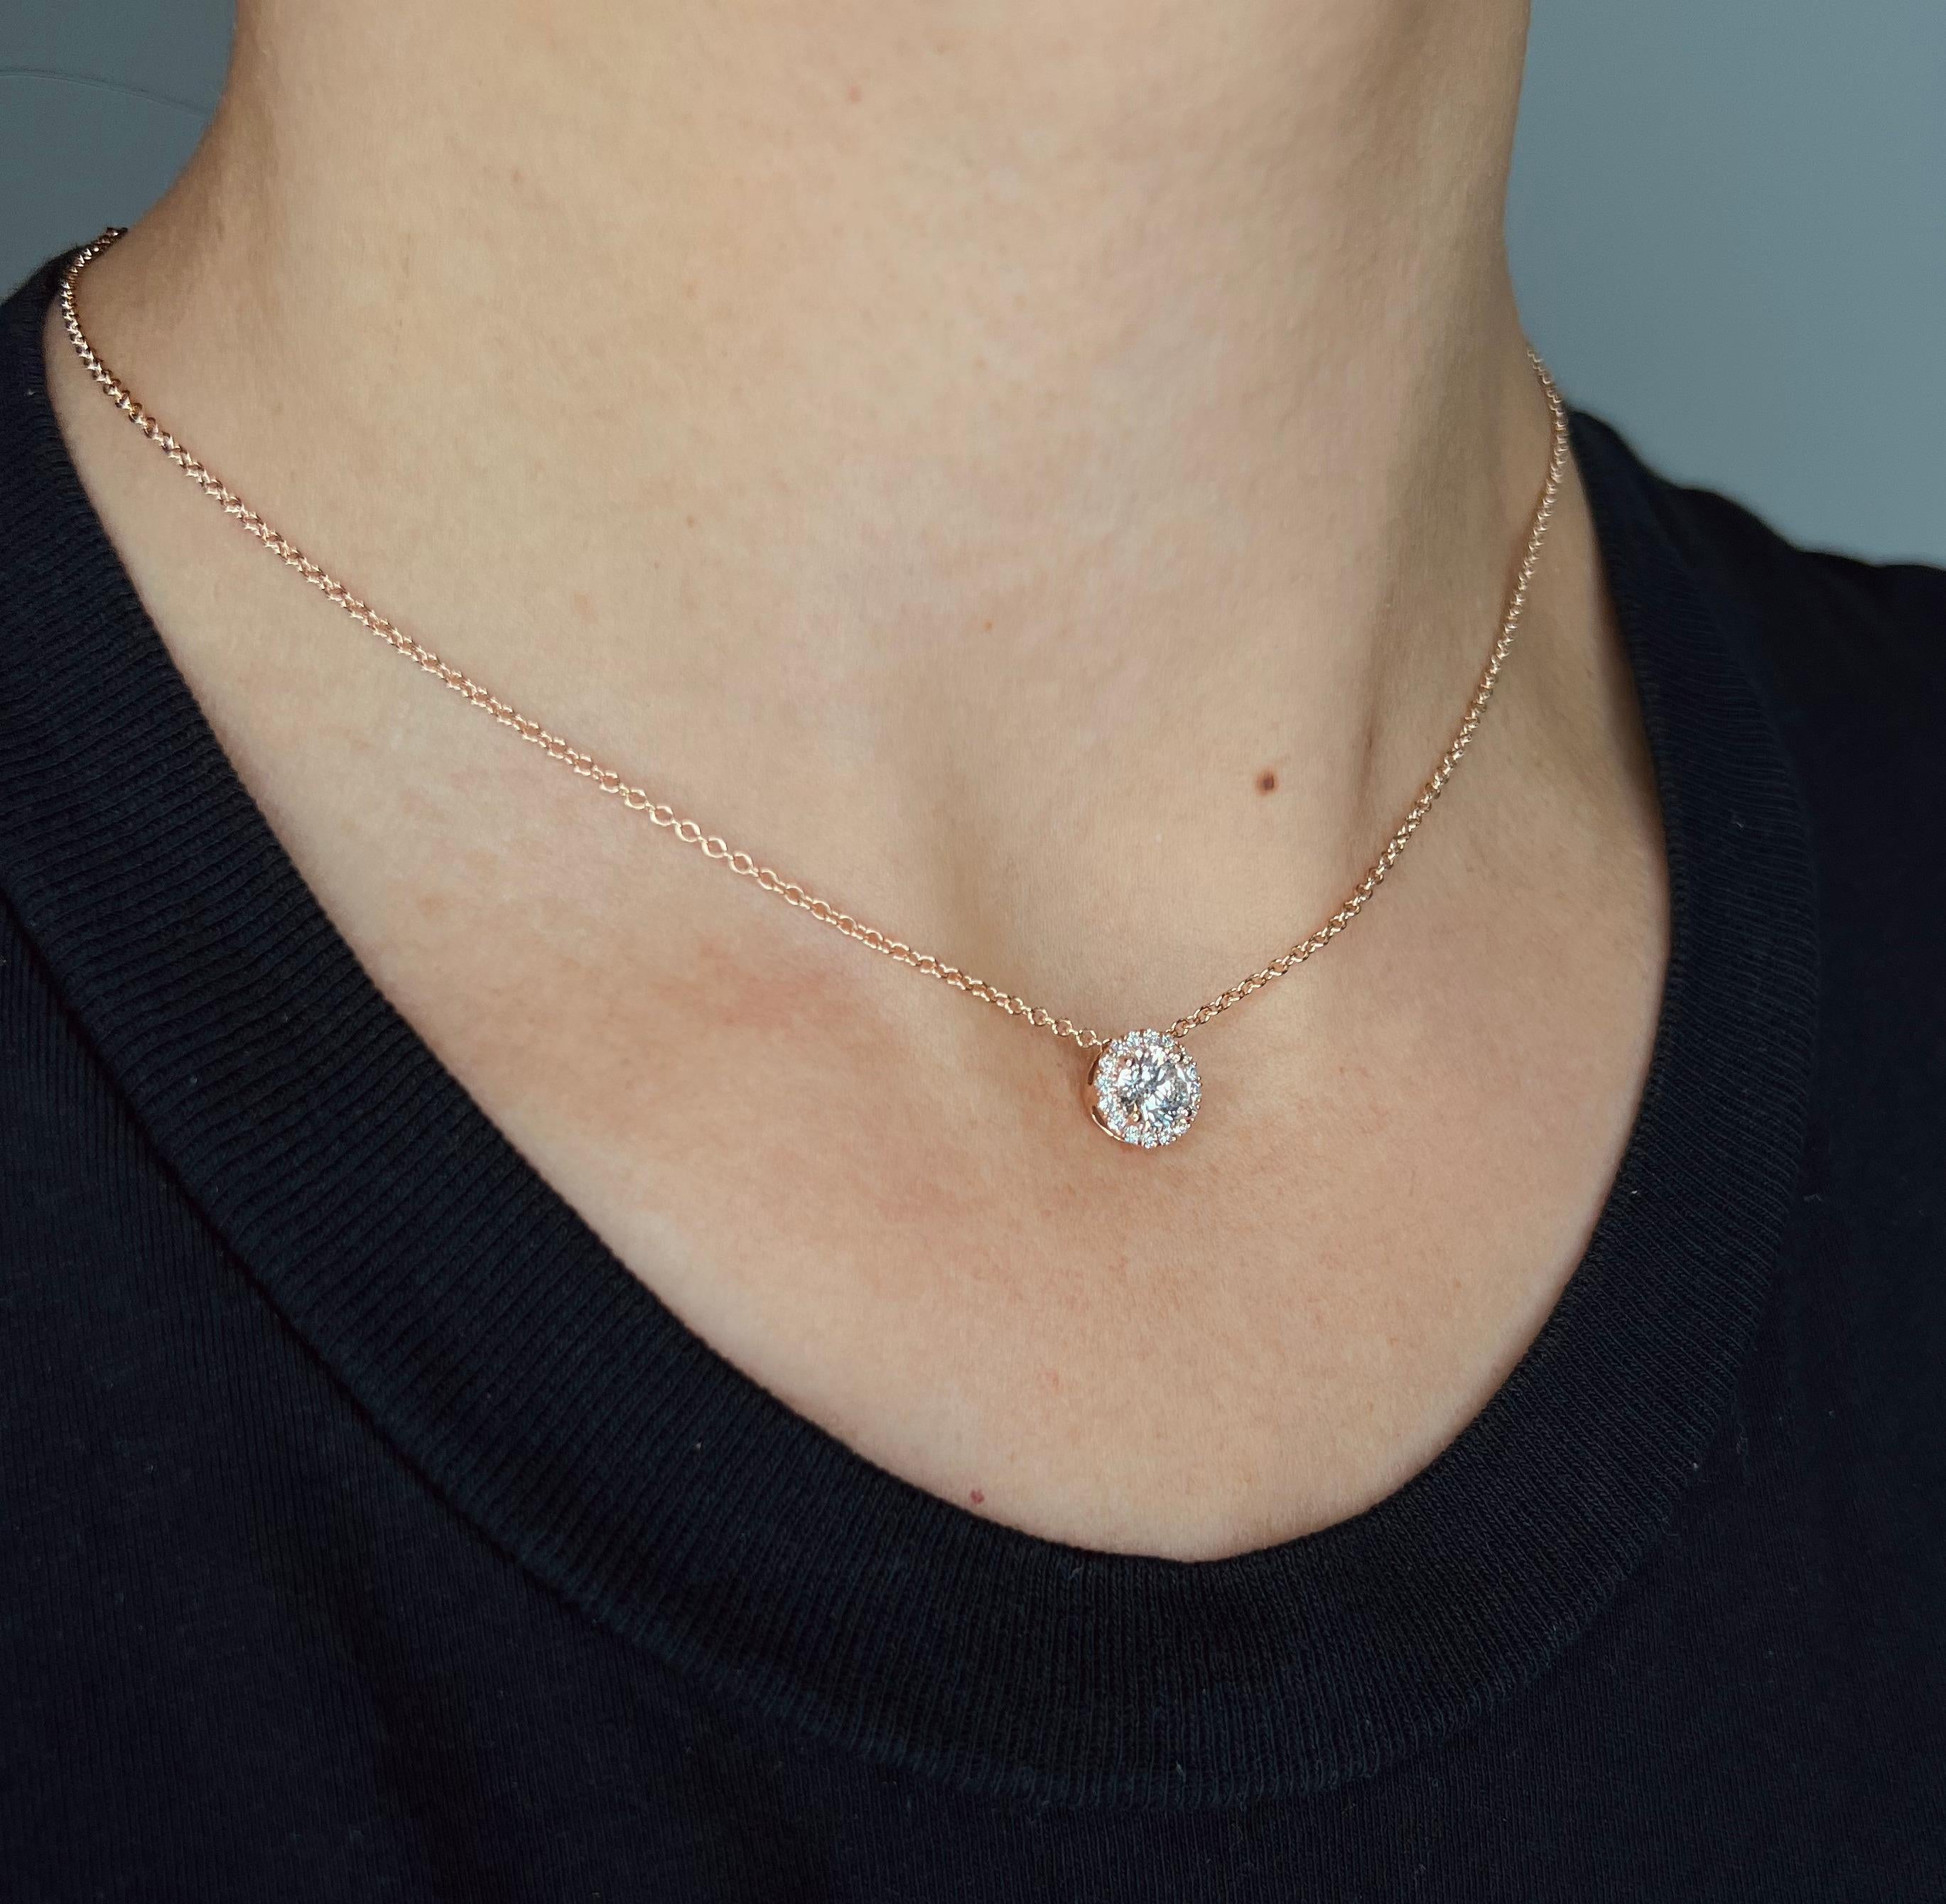 This diamond circle pendant provides a glowing chic look.
Metal: 14k Gold
Diamond Total Carats (Includes 0.15ct halo): 0.65 Total (0.50ct Center)
Diamond Cut: Round Natural Diamonds (Not Lab Grown)
Diamond Clarity: VS
Diamond Color: F-G
Color: